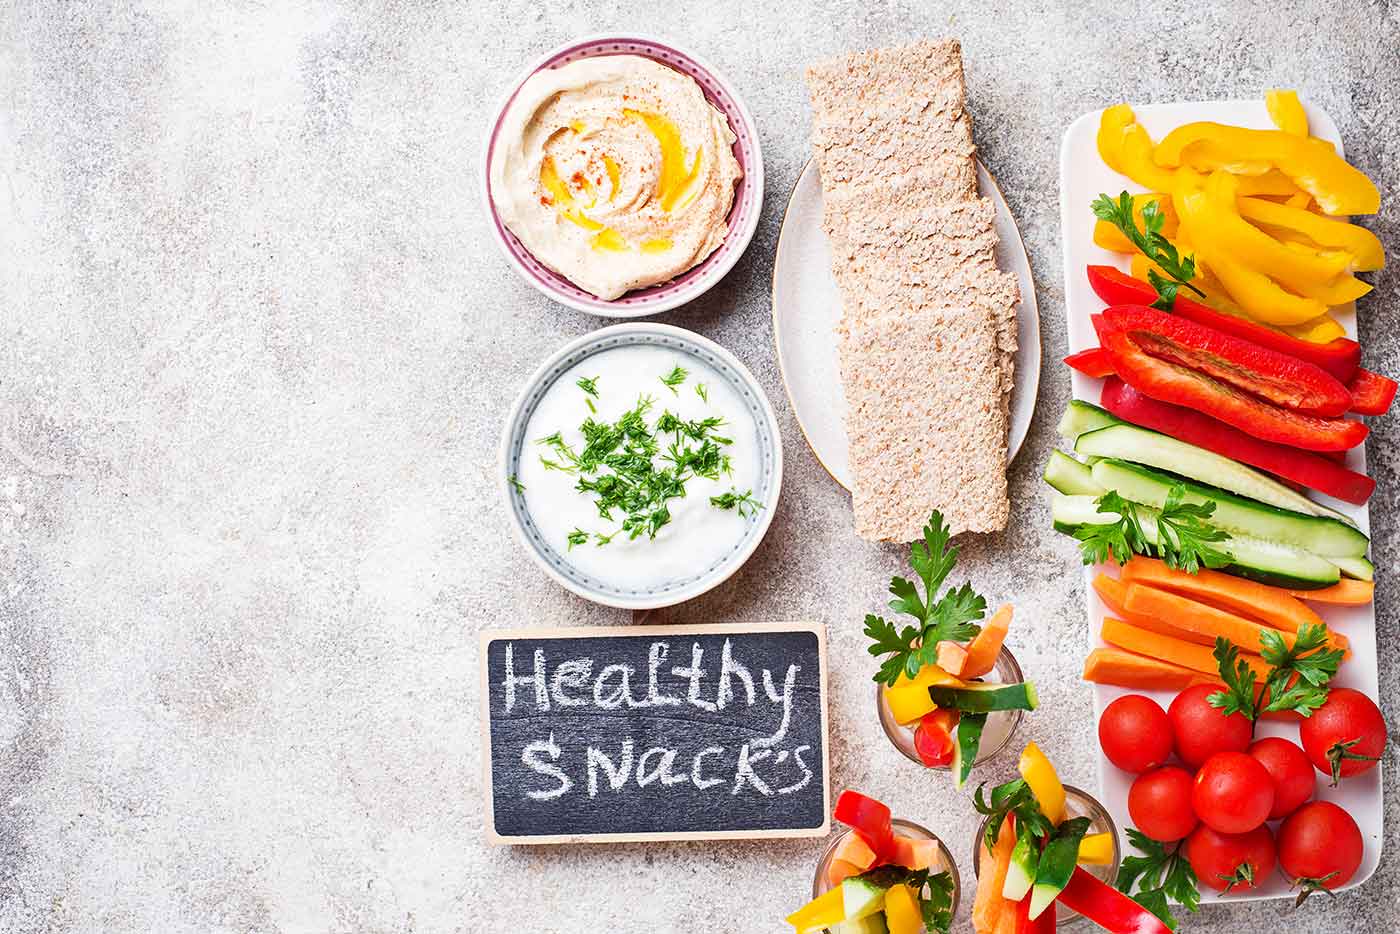 Getting Hungry in the Afternoon? Try These Healthy Snacks